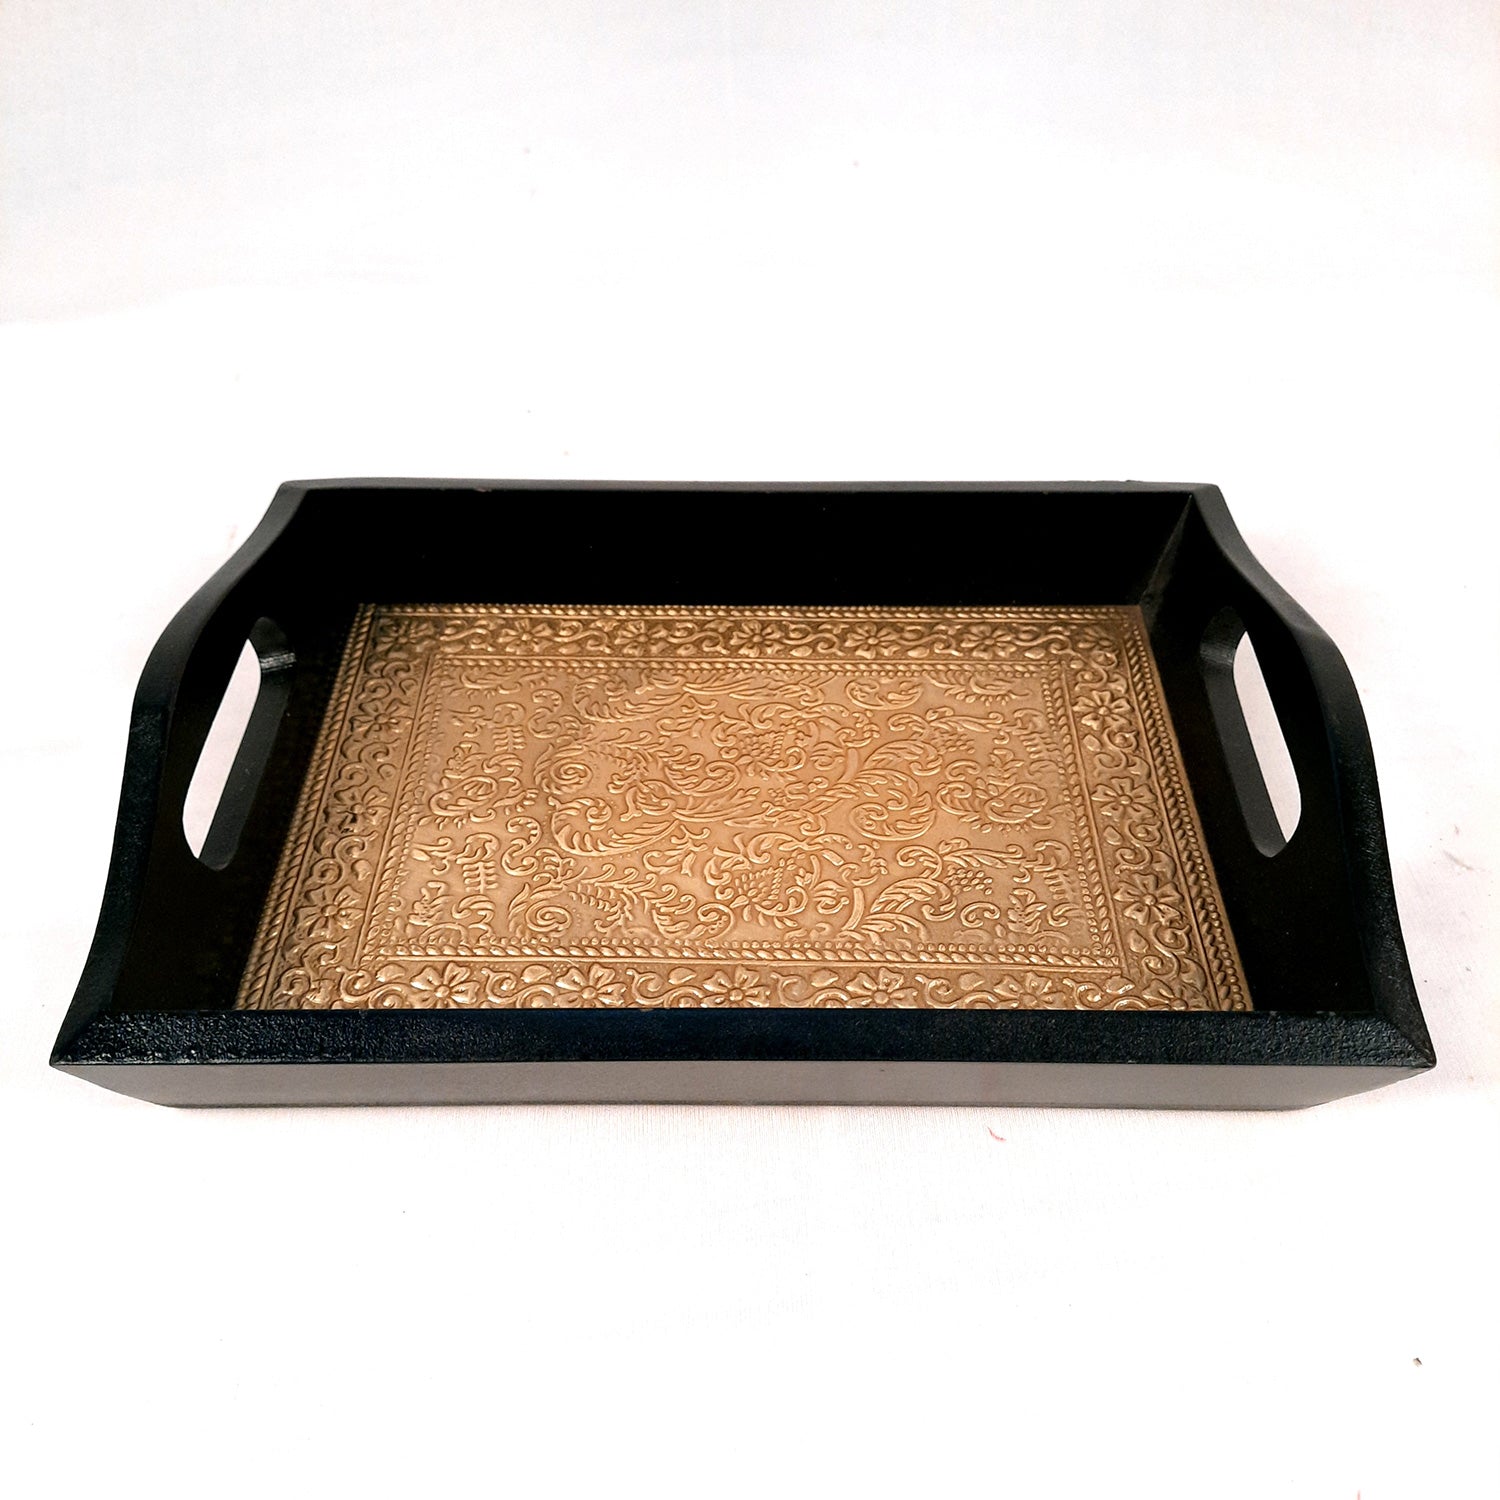 Buy Wooden Trays: Handcrafted Serving Platters for Tea & Coffee